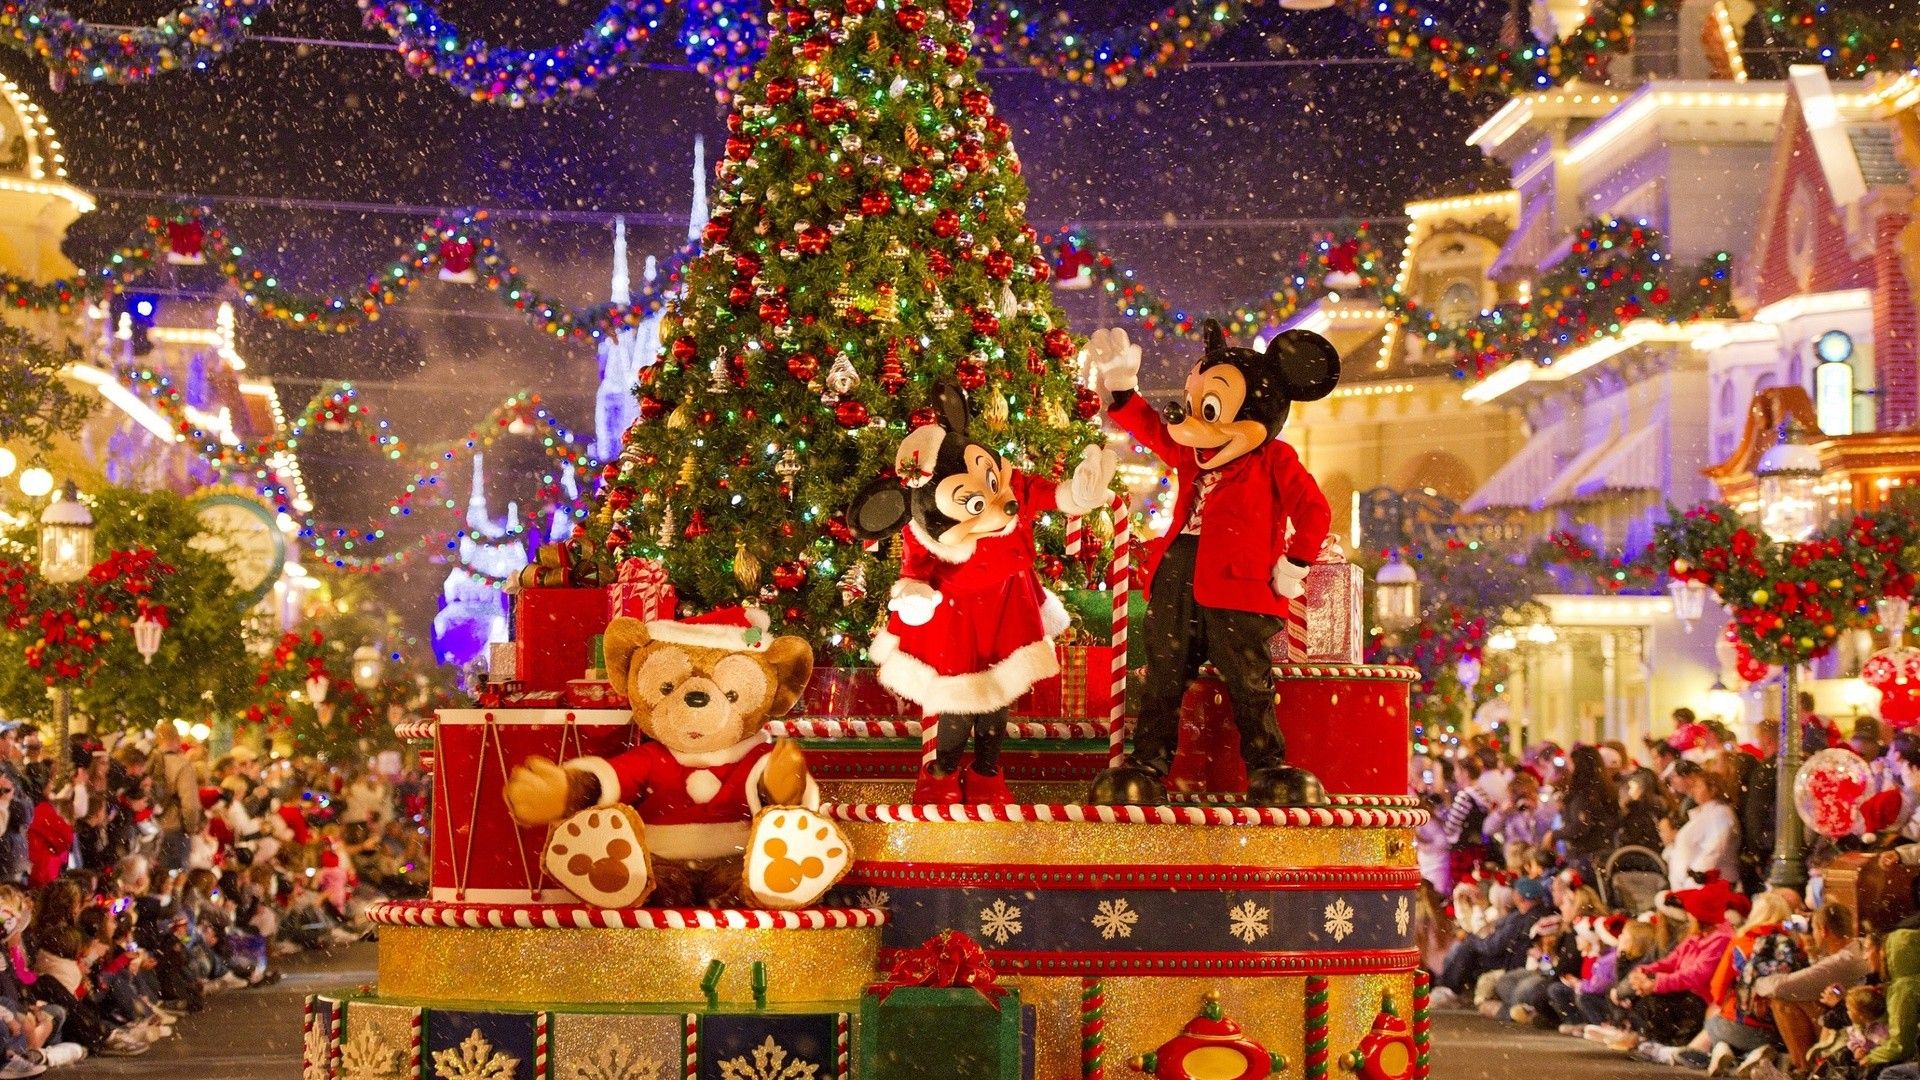 1920x Mickey Mouse, Minnie Mouse, Christmas Tree, World, Cinderella Castle